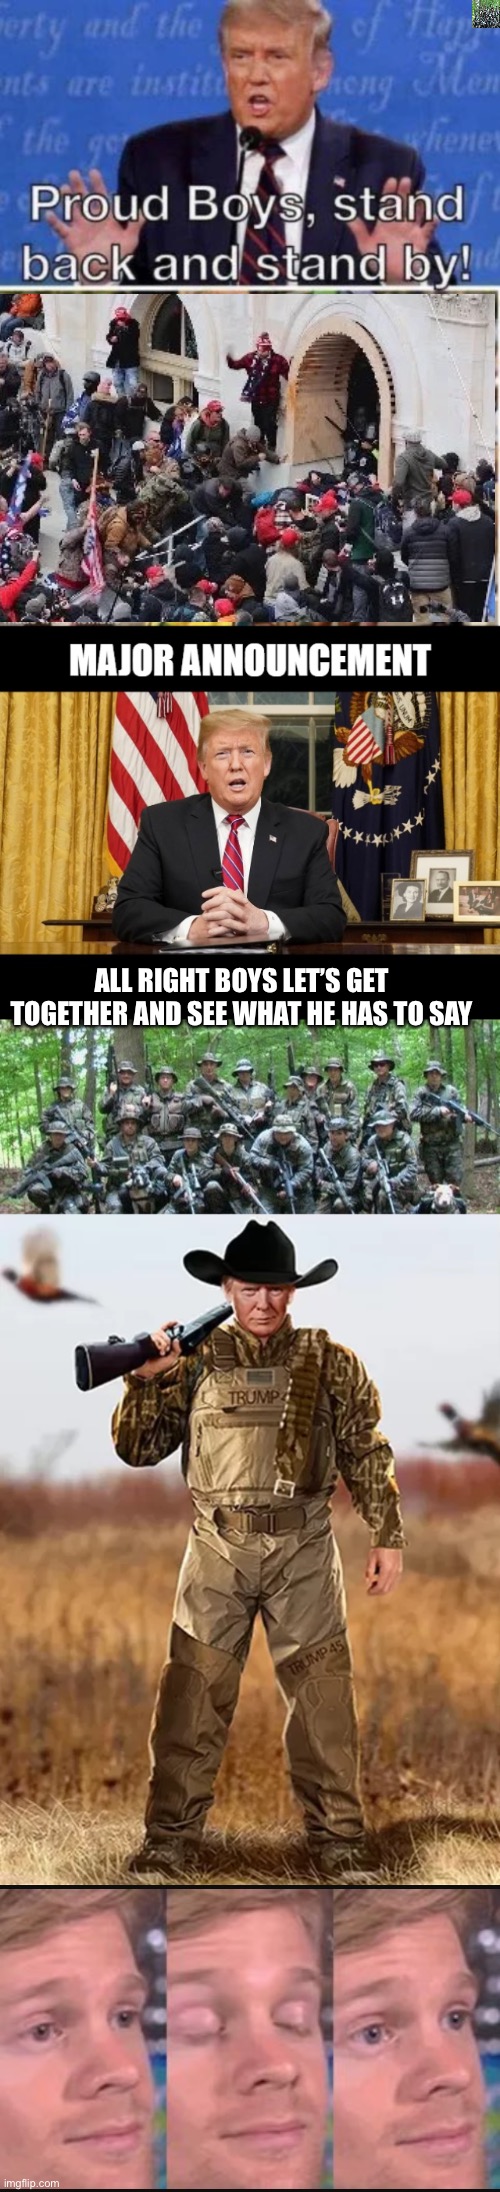 ALL RIGHT BOYS LET’S GET TOGETHER AND SEE WHAT HE HAS TO SAY | image tagged in proud boys stand back and stand by,major announcement,militia,trump nft,blinking guy | made w/ Imgflip meme maker